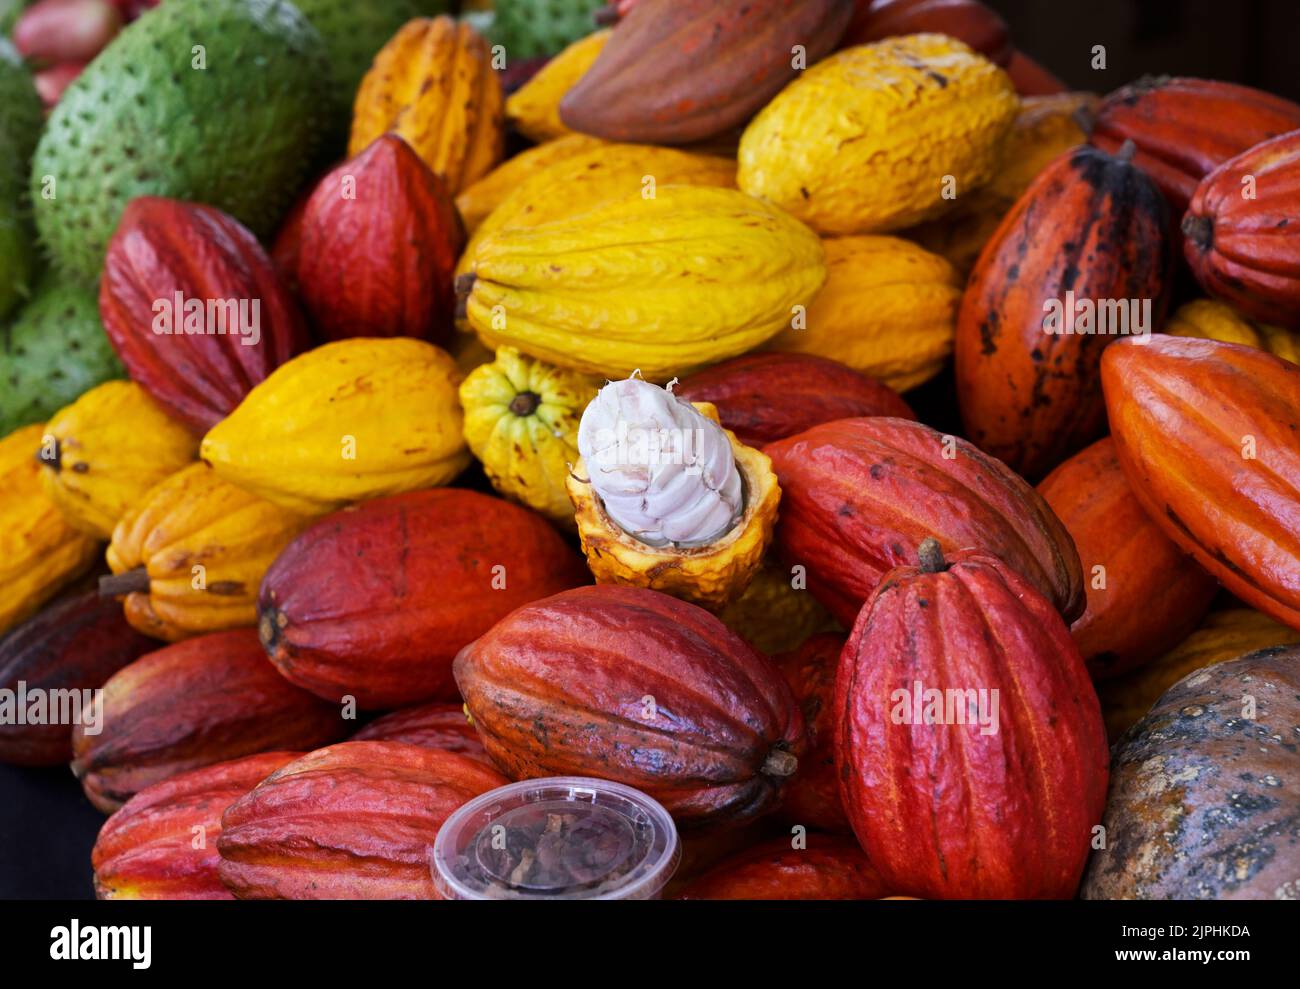 Cacao pods, one opened showing seeds, Hawaii Stock Photo